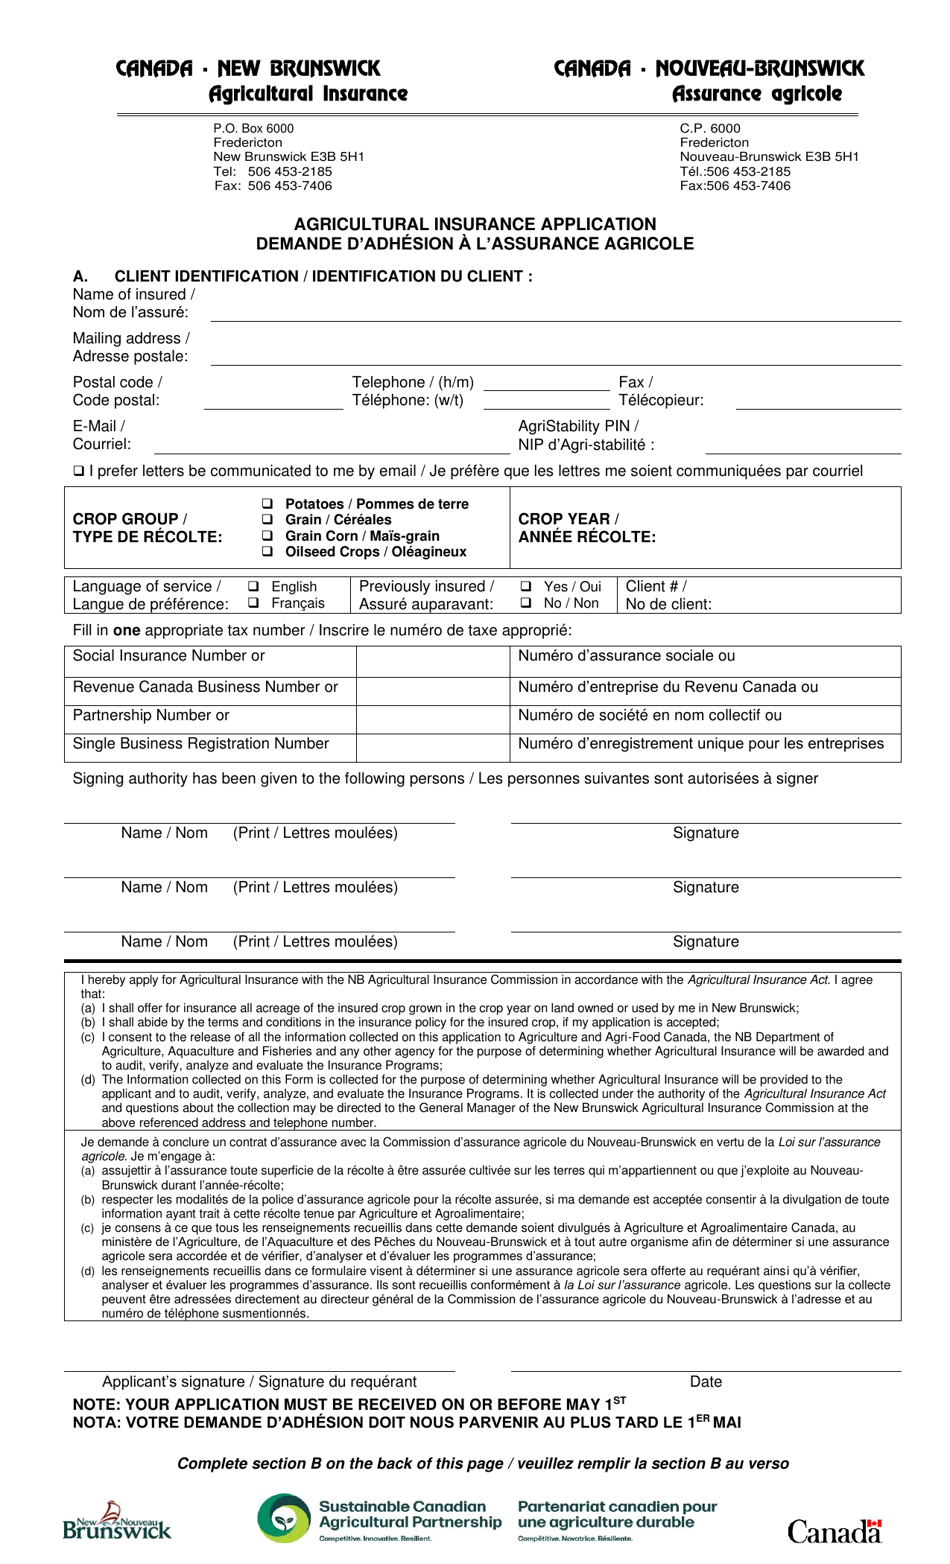 Agricultural Insurance Application - New Brunswick, Canada (English / French), Page 1